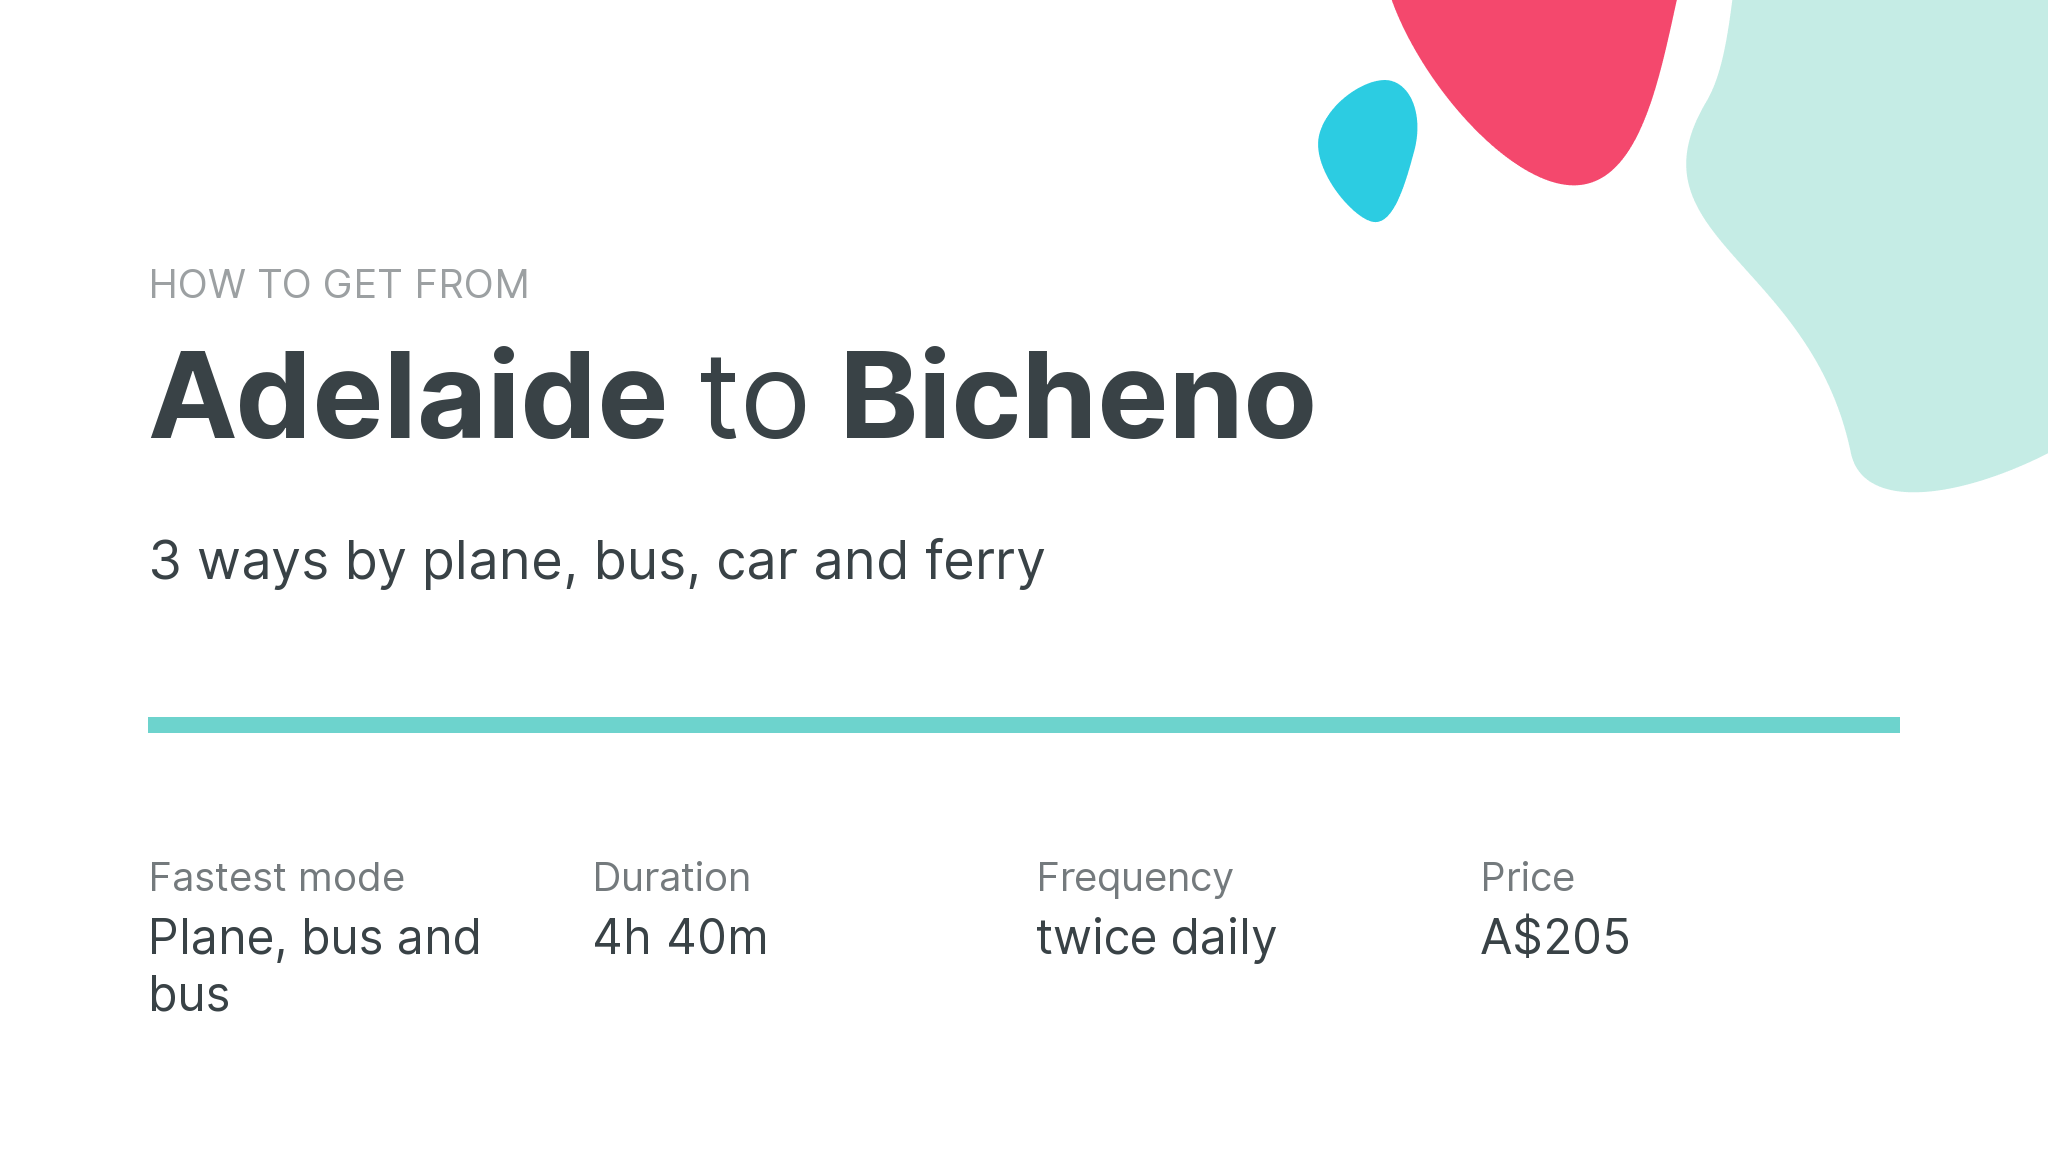 How do I get from Adelaide to Bicheno